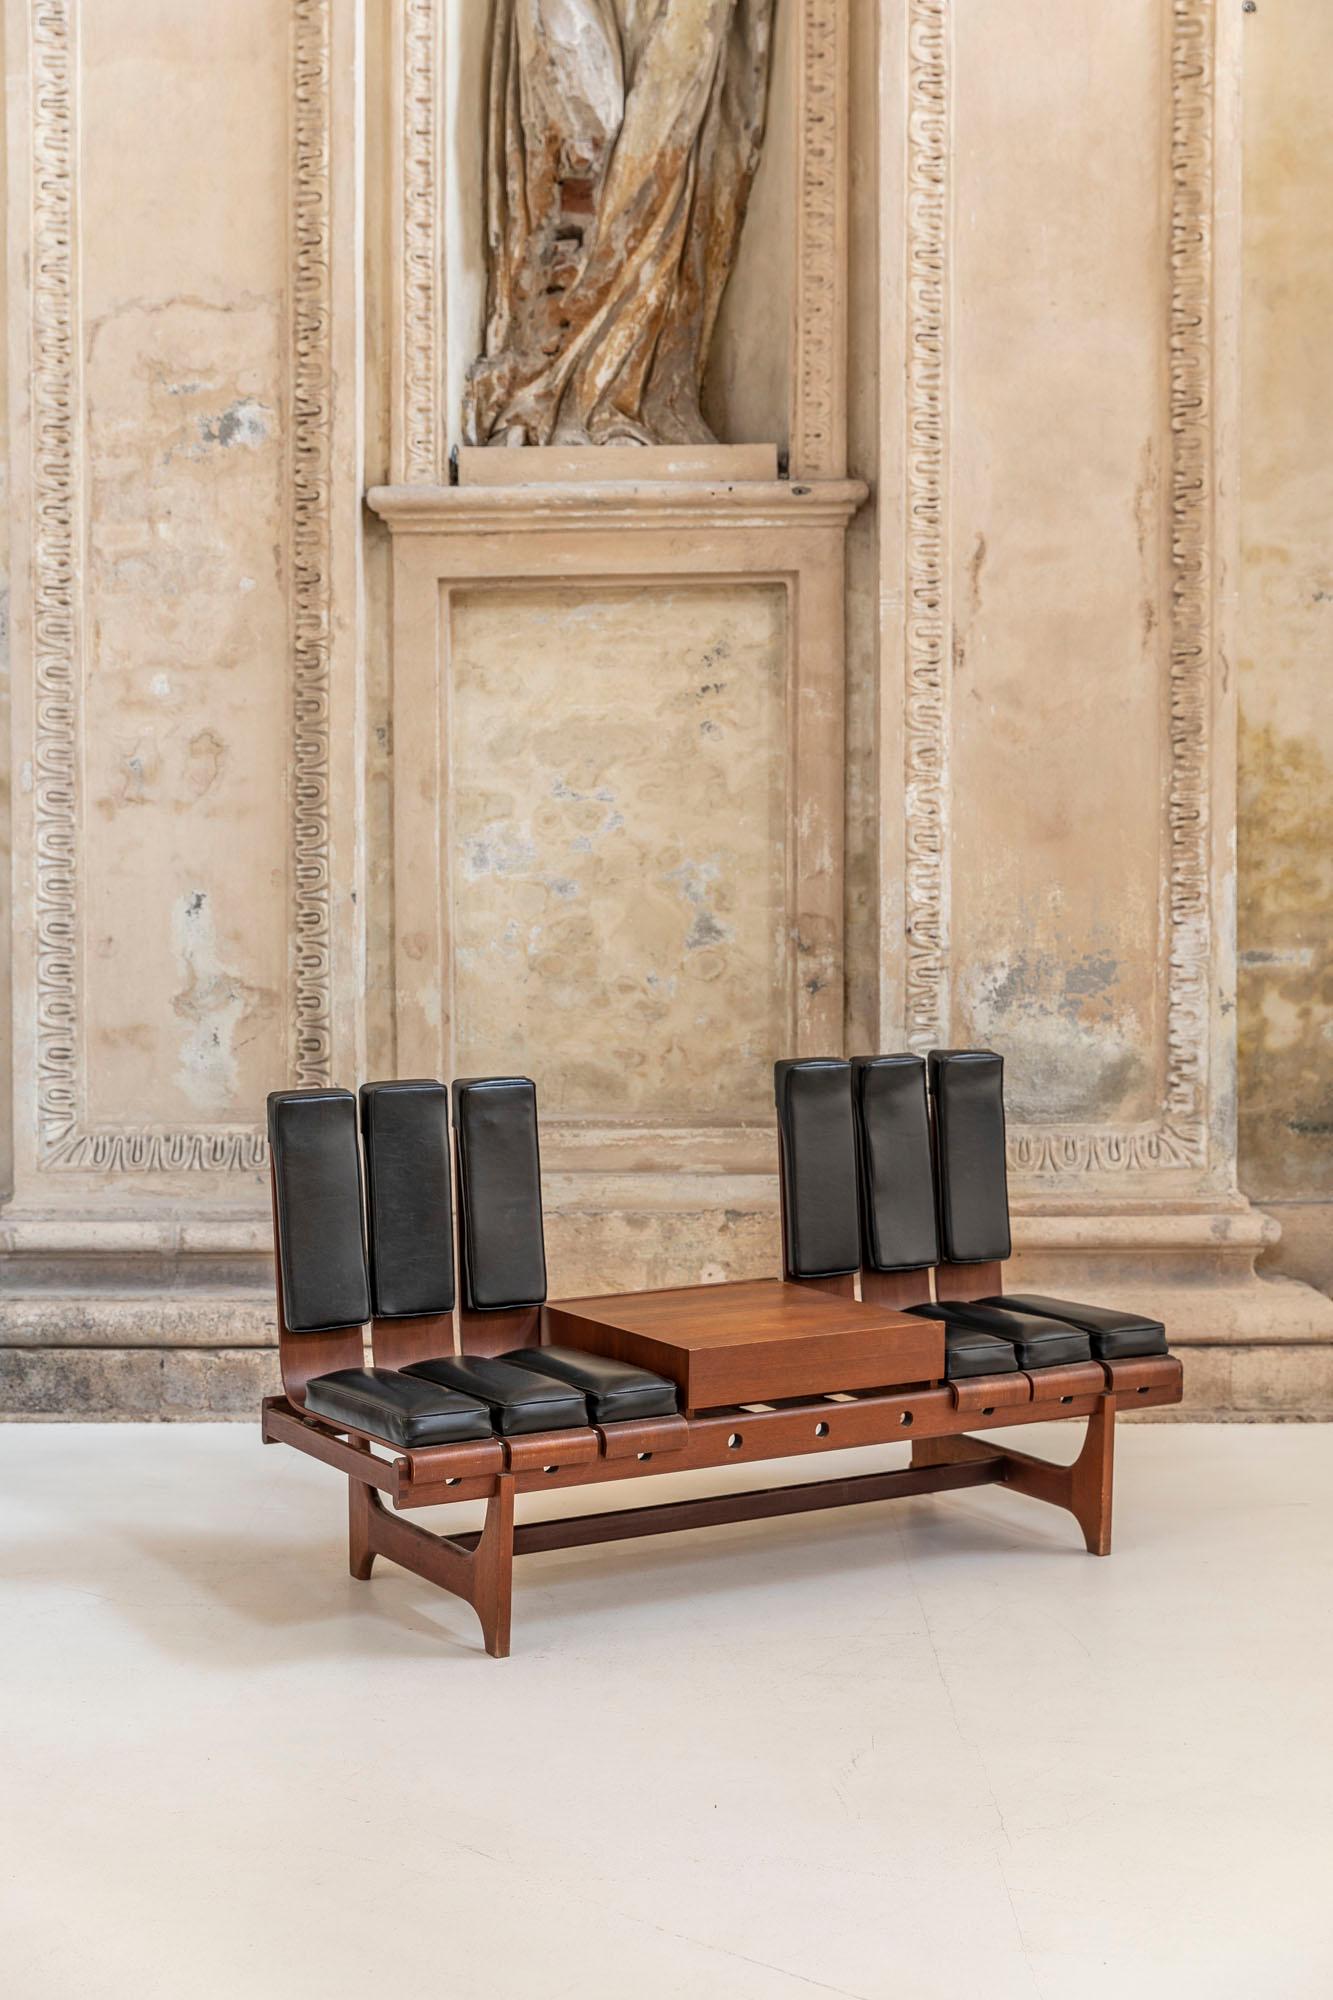 Modular bench by Barovero Torino in teak and black leather, Italy, 1950 ca.
Sectional bench with drawer in the central part. The bench is made in teak with two black leather seat (each one in three parts) and leather straps in the back.

  